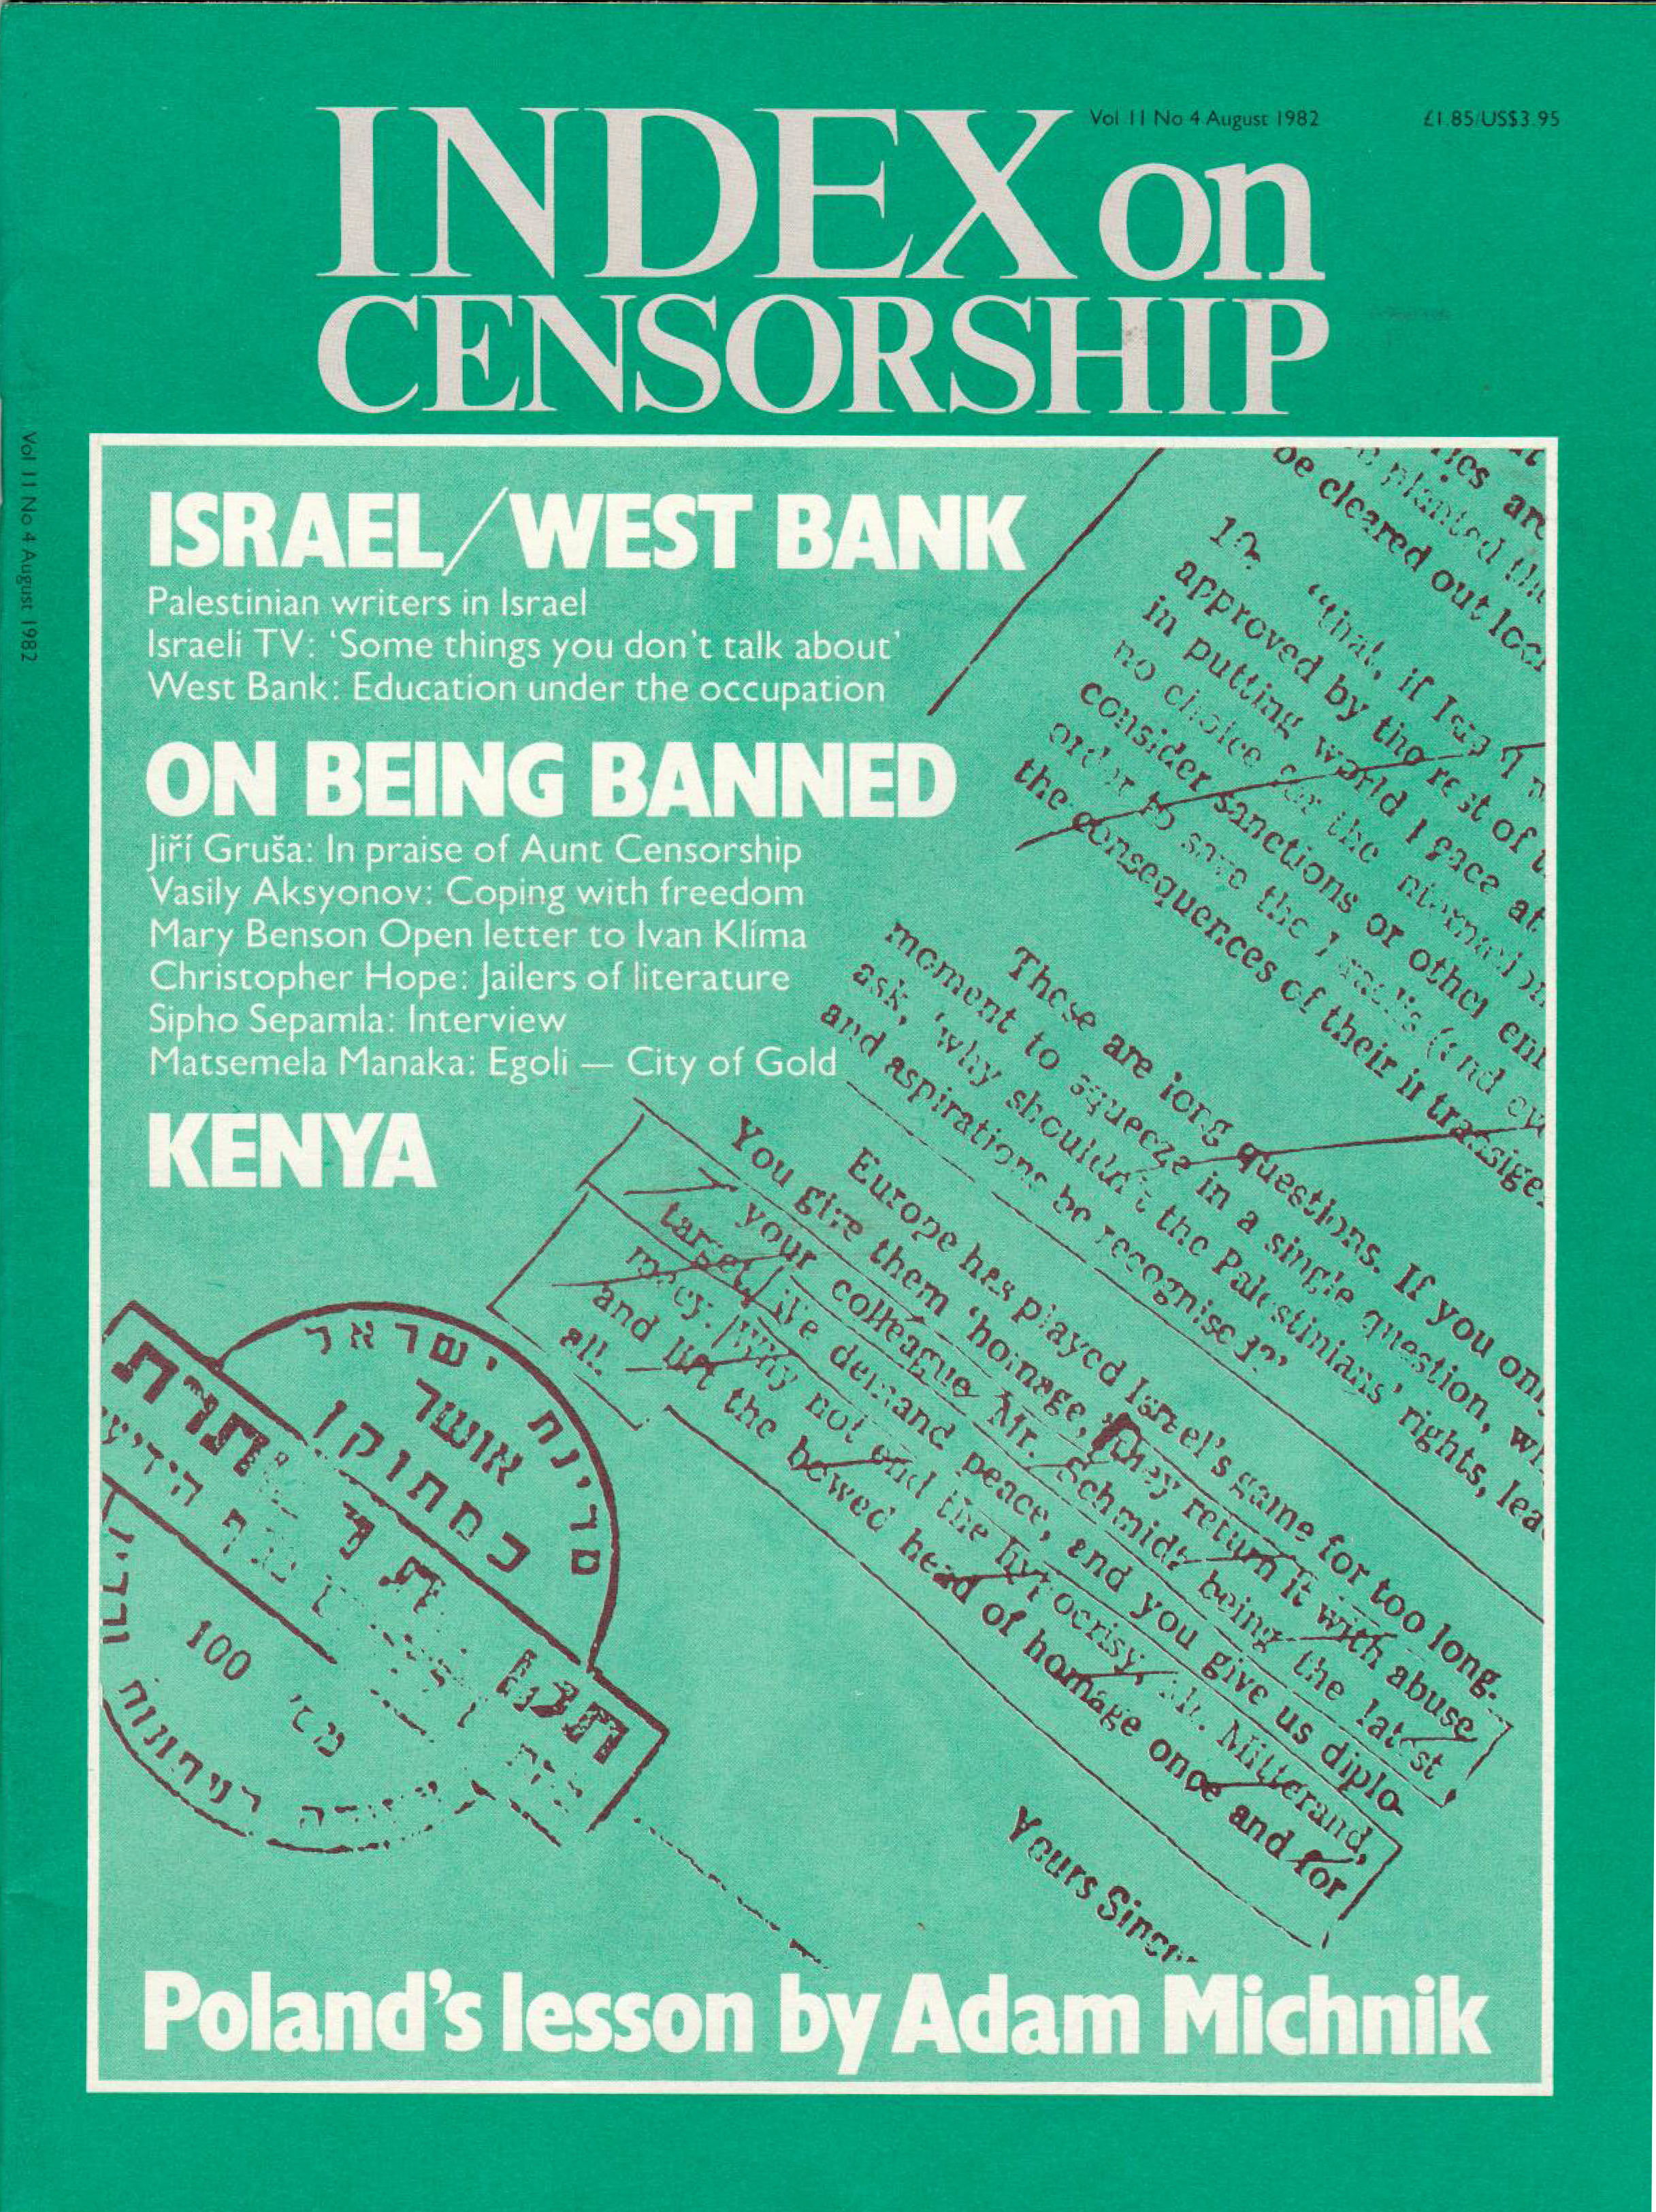 Israel/West Bank the August 1982 issue of Index on Censorship magazine.